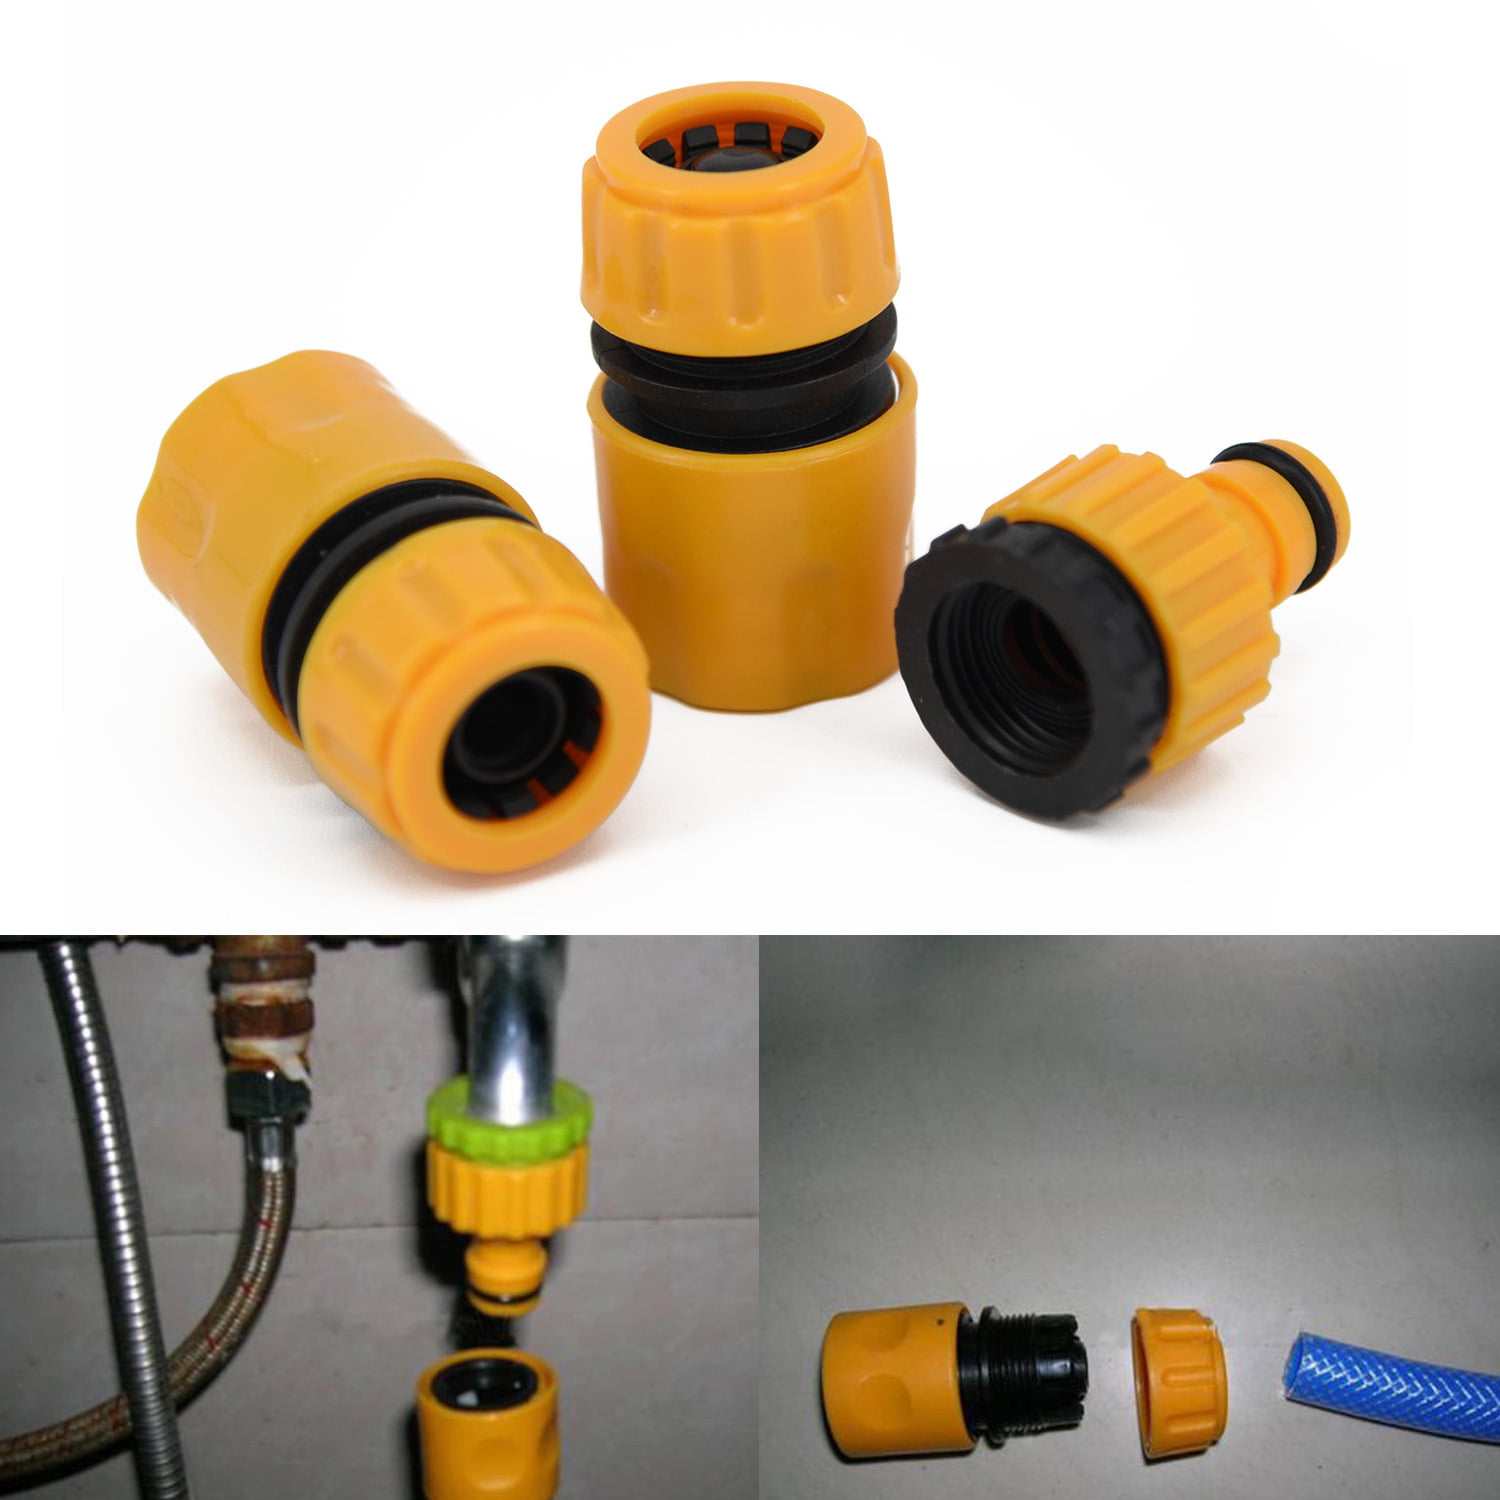 2 Sets 1/2" Female Hose Pipe Fitting Set Quick Garden Water Connector Adaptor 